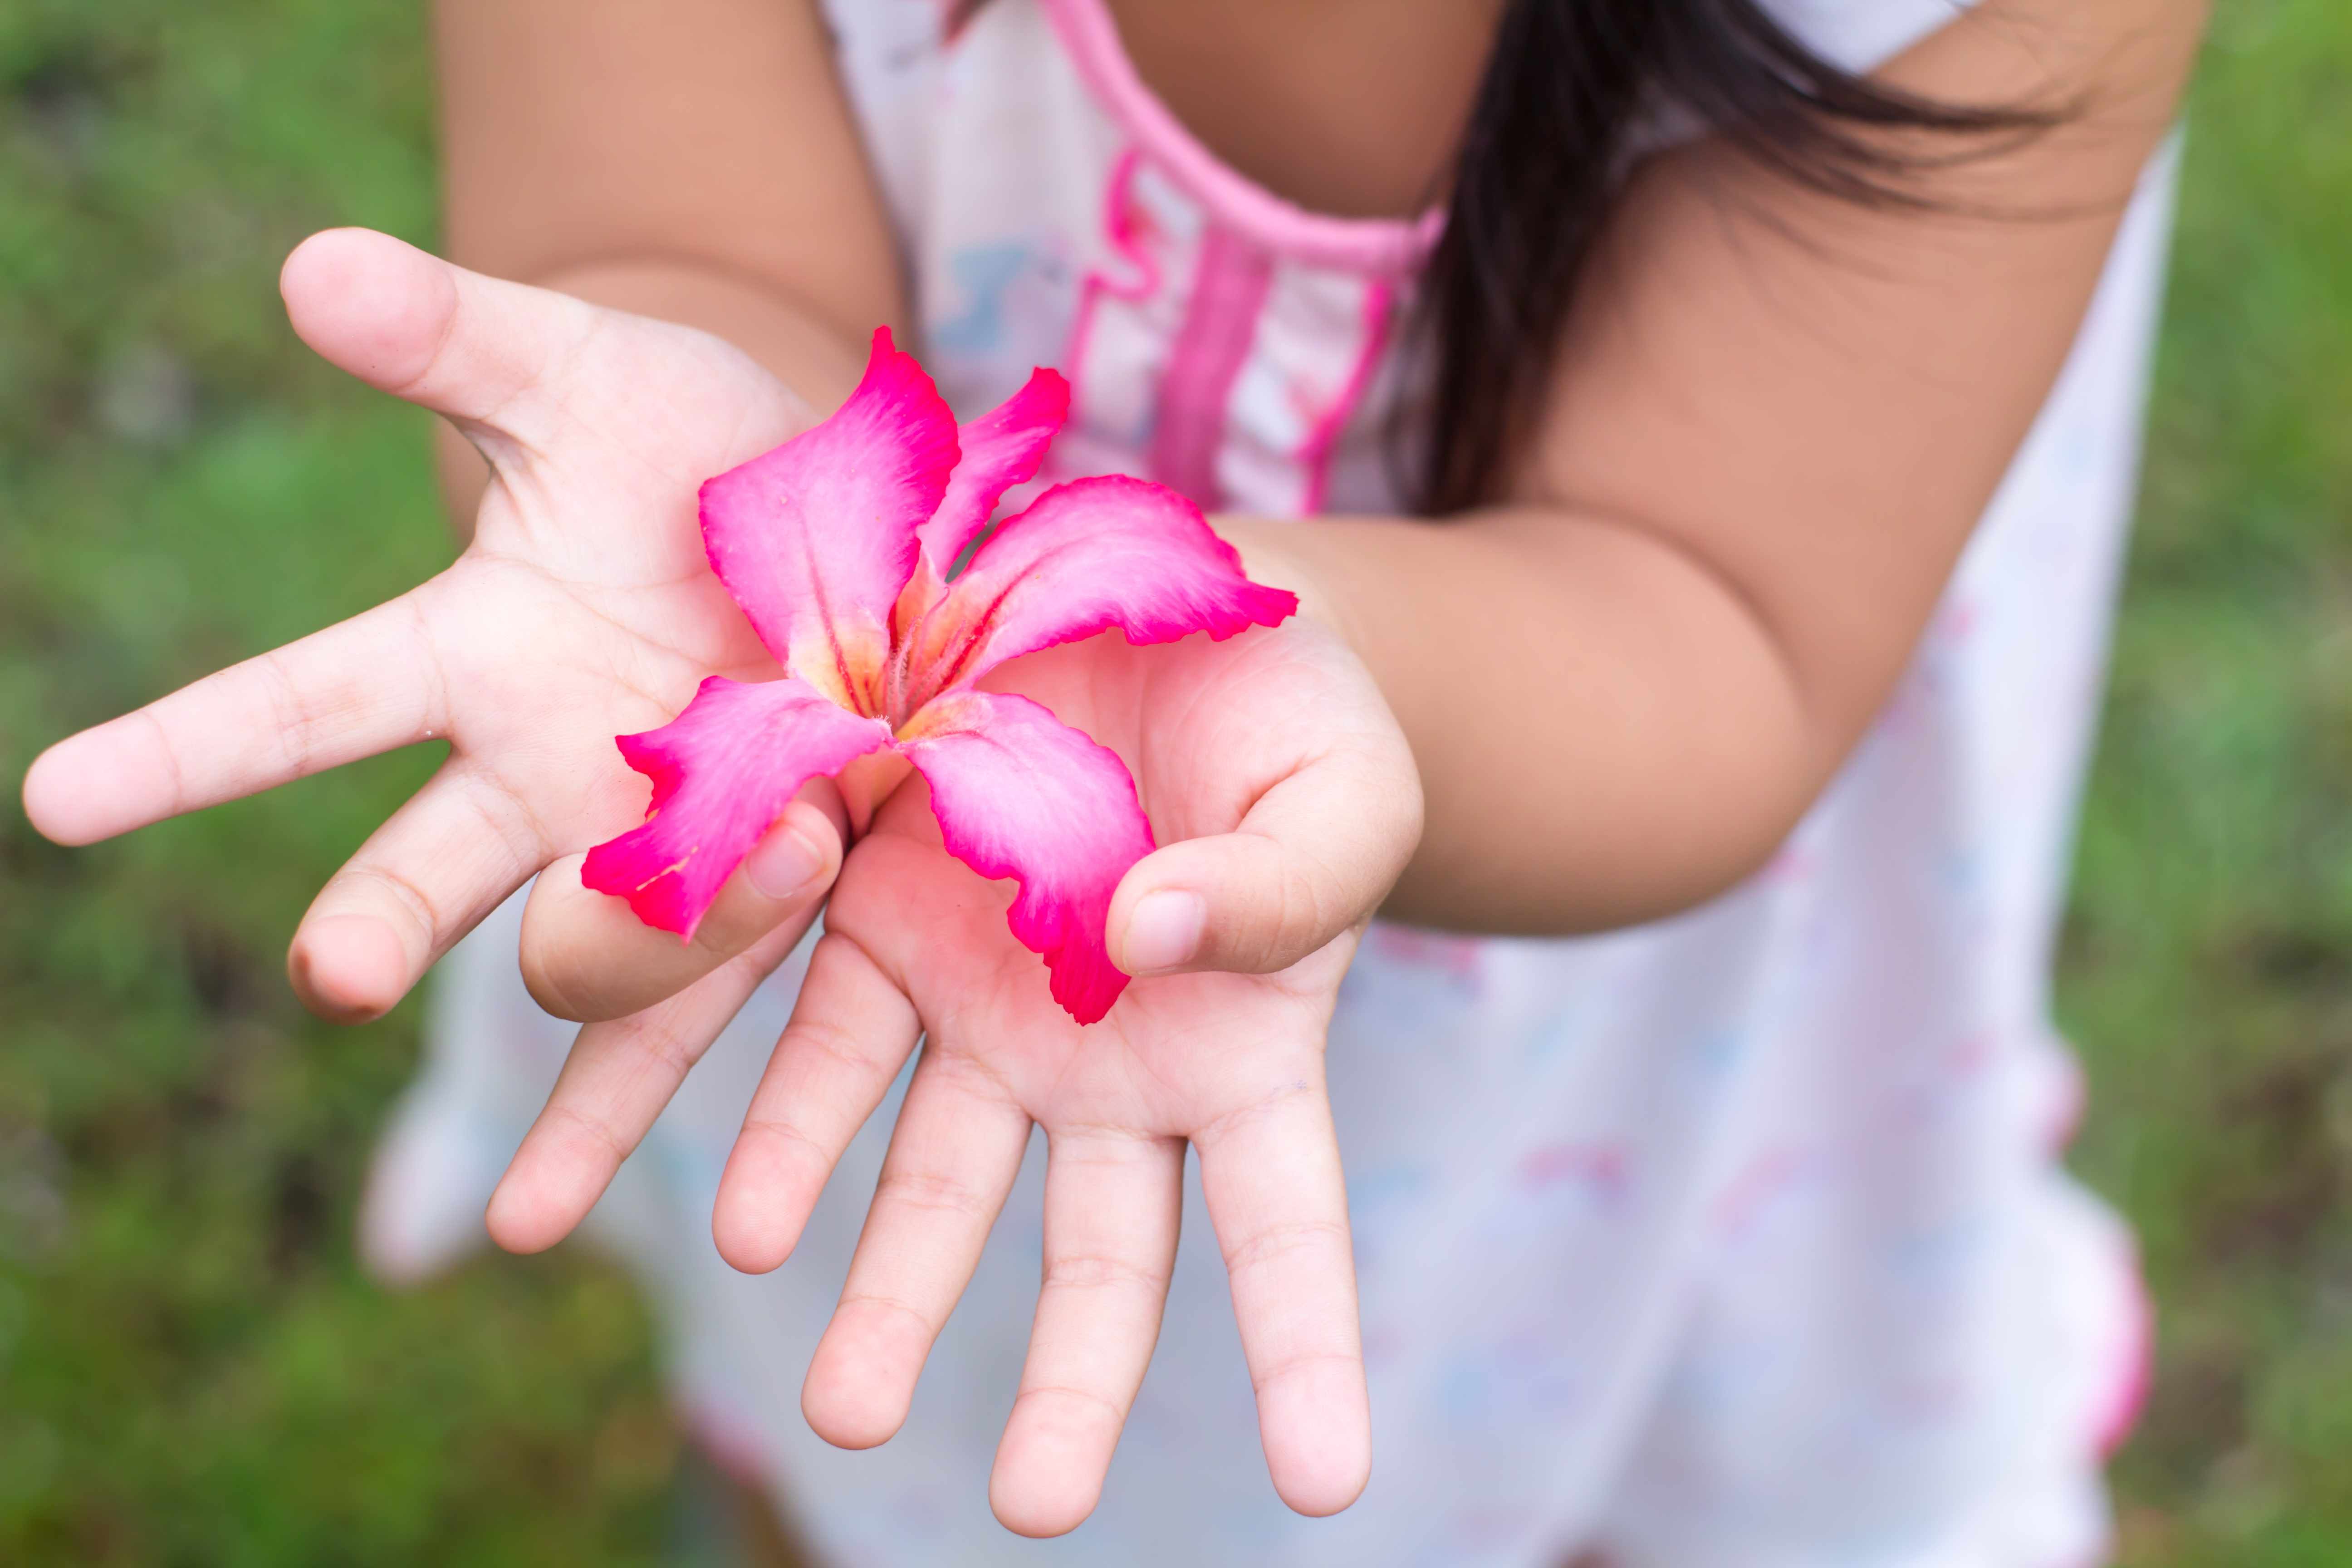 a young girl gently holding a bright pink flower in her hands and offering it like a gift